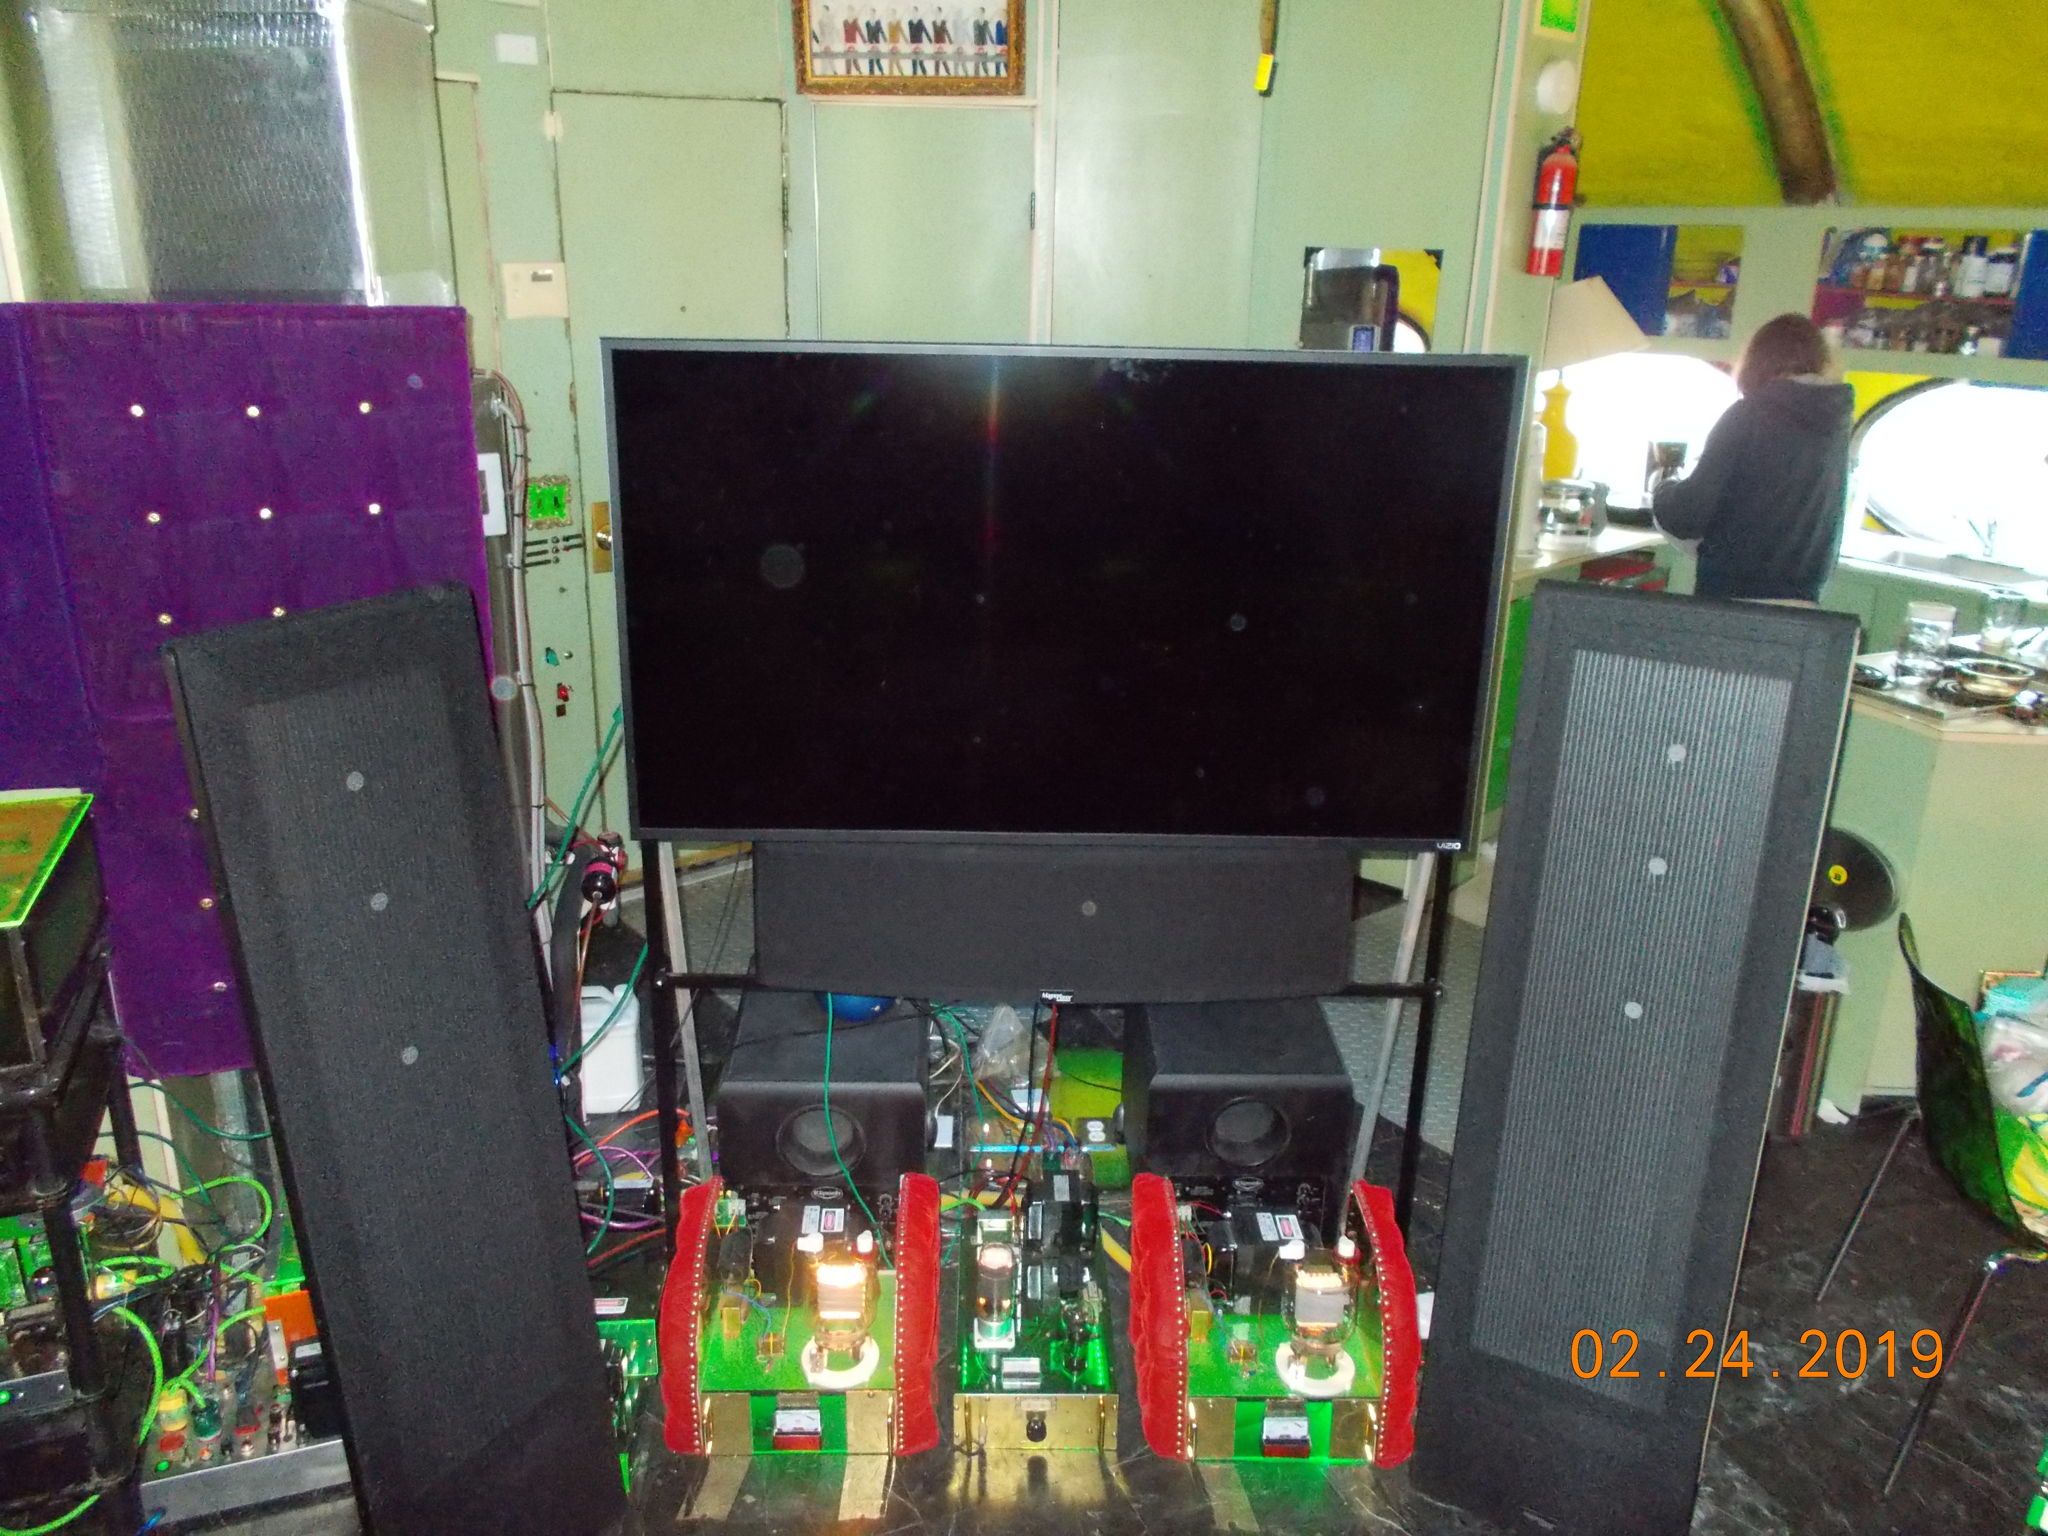 The front speakers, Magnepan 0.7's the center channel speaker, Magnepan MMG c and a VISIO 65" screen